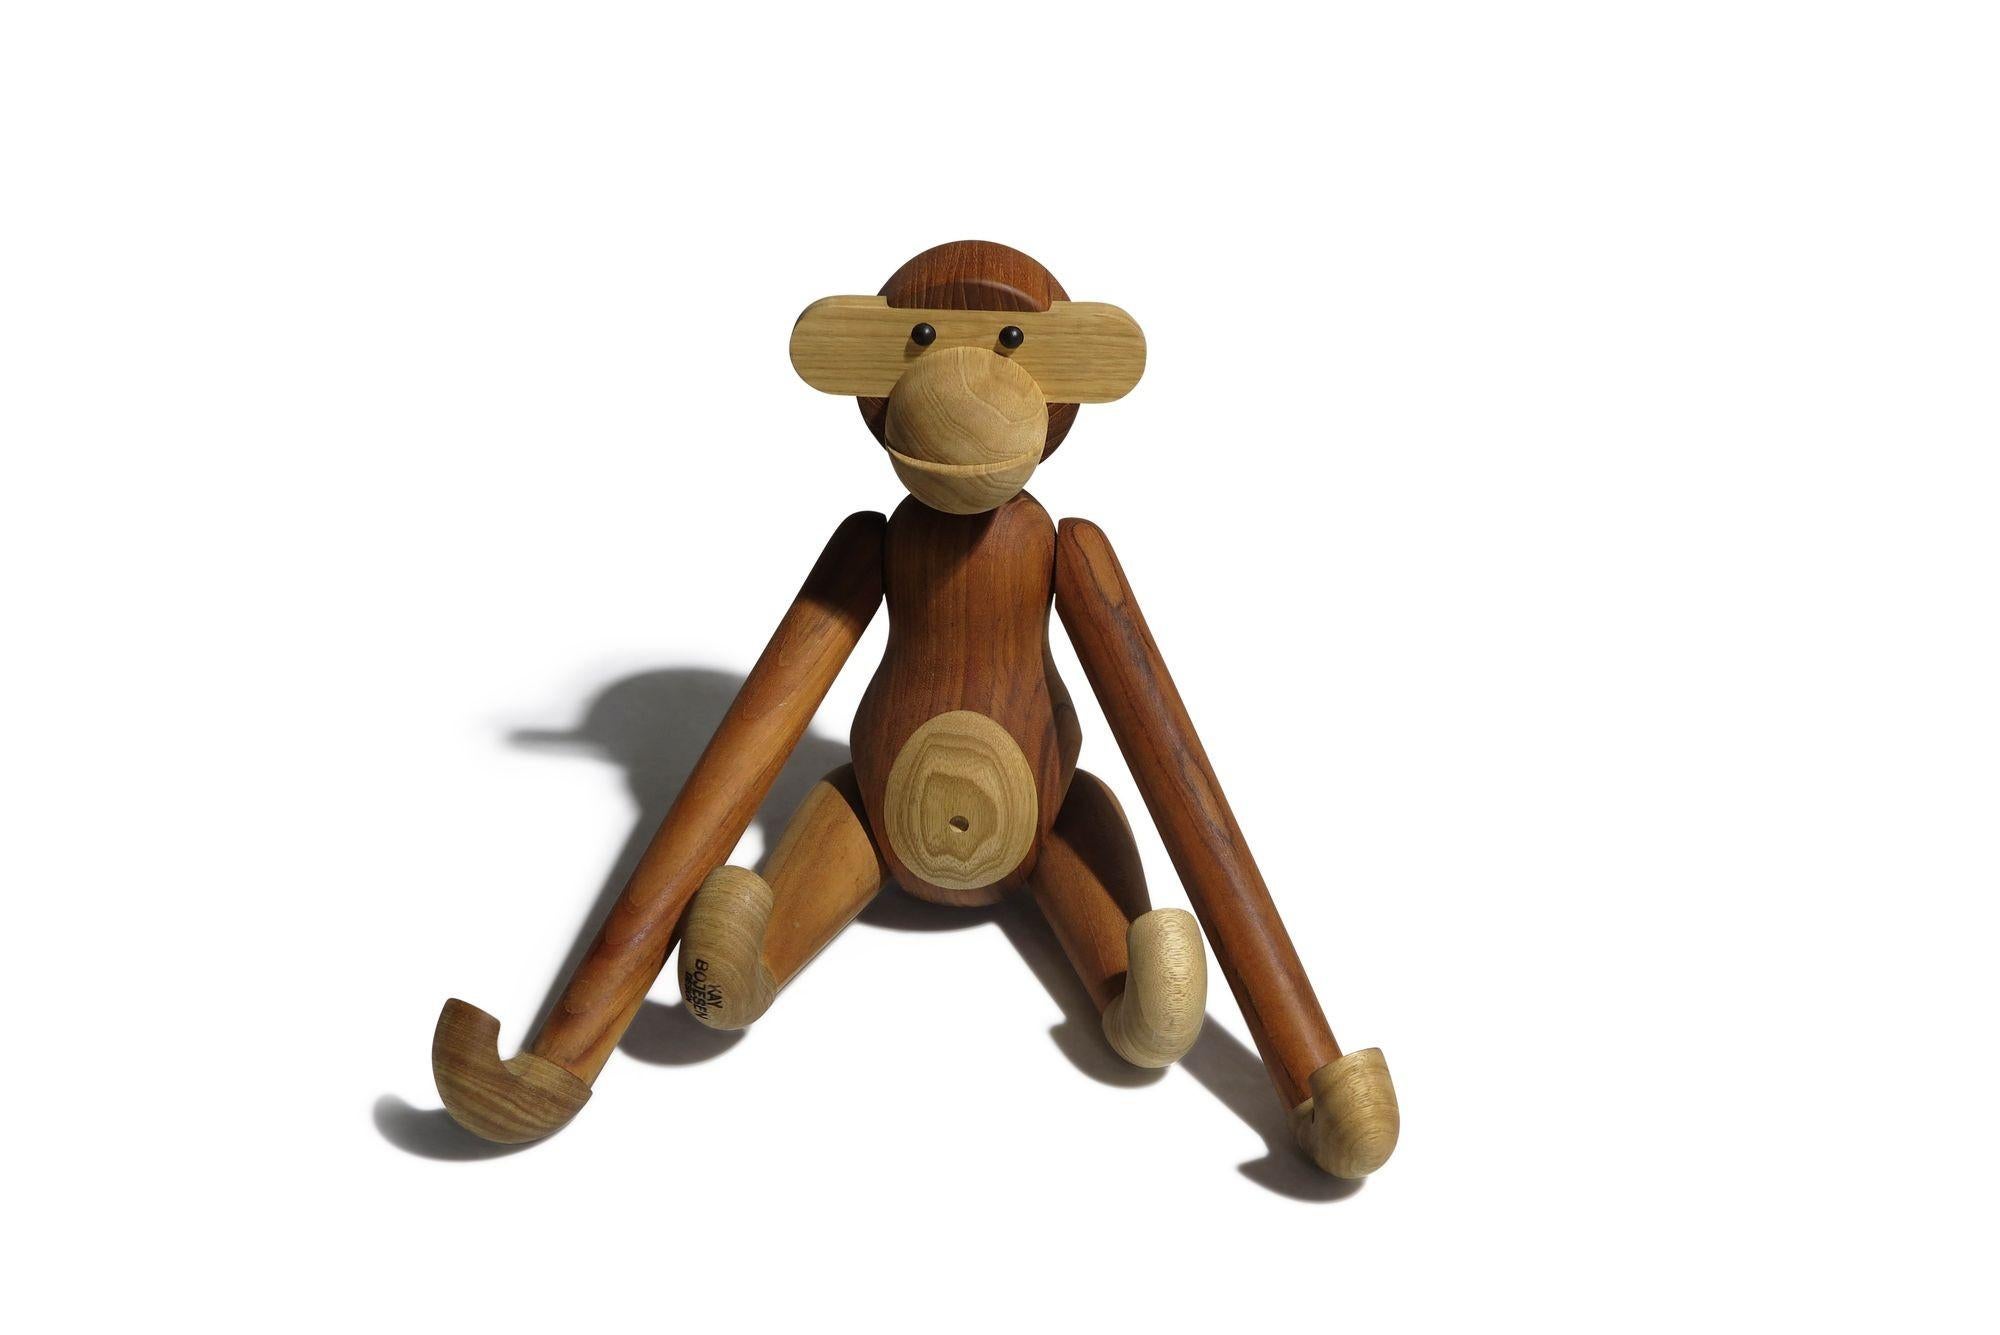 Large Kay Bojesen monkey, designed in 1951, Denmark. Sculpted of solid teak and limba wood. It features segmented limbs, movable heads, arms and legs. Stamped.

Measurements: Body 18